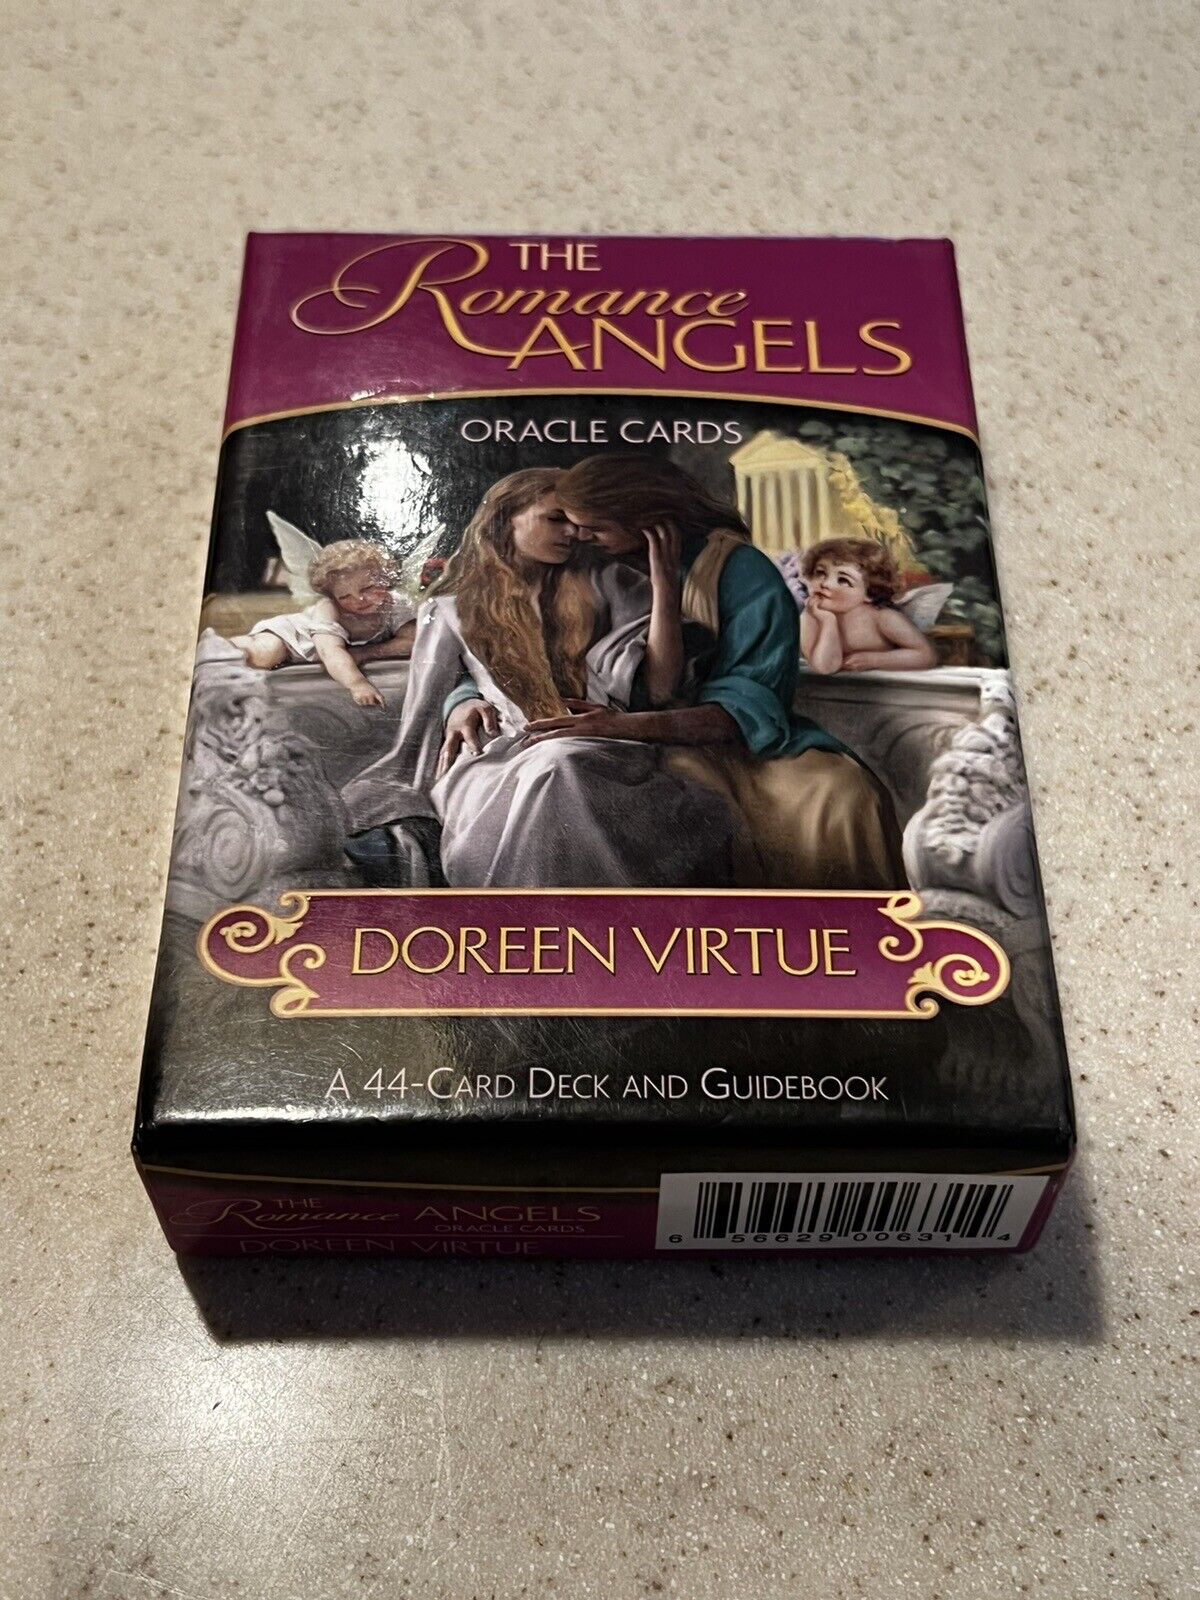 OOP AUTHENTIC 2012 The Romance Angels Oracle Cards by Doreen Virtue *EXCELLENT*